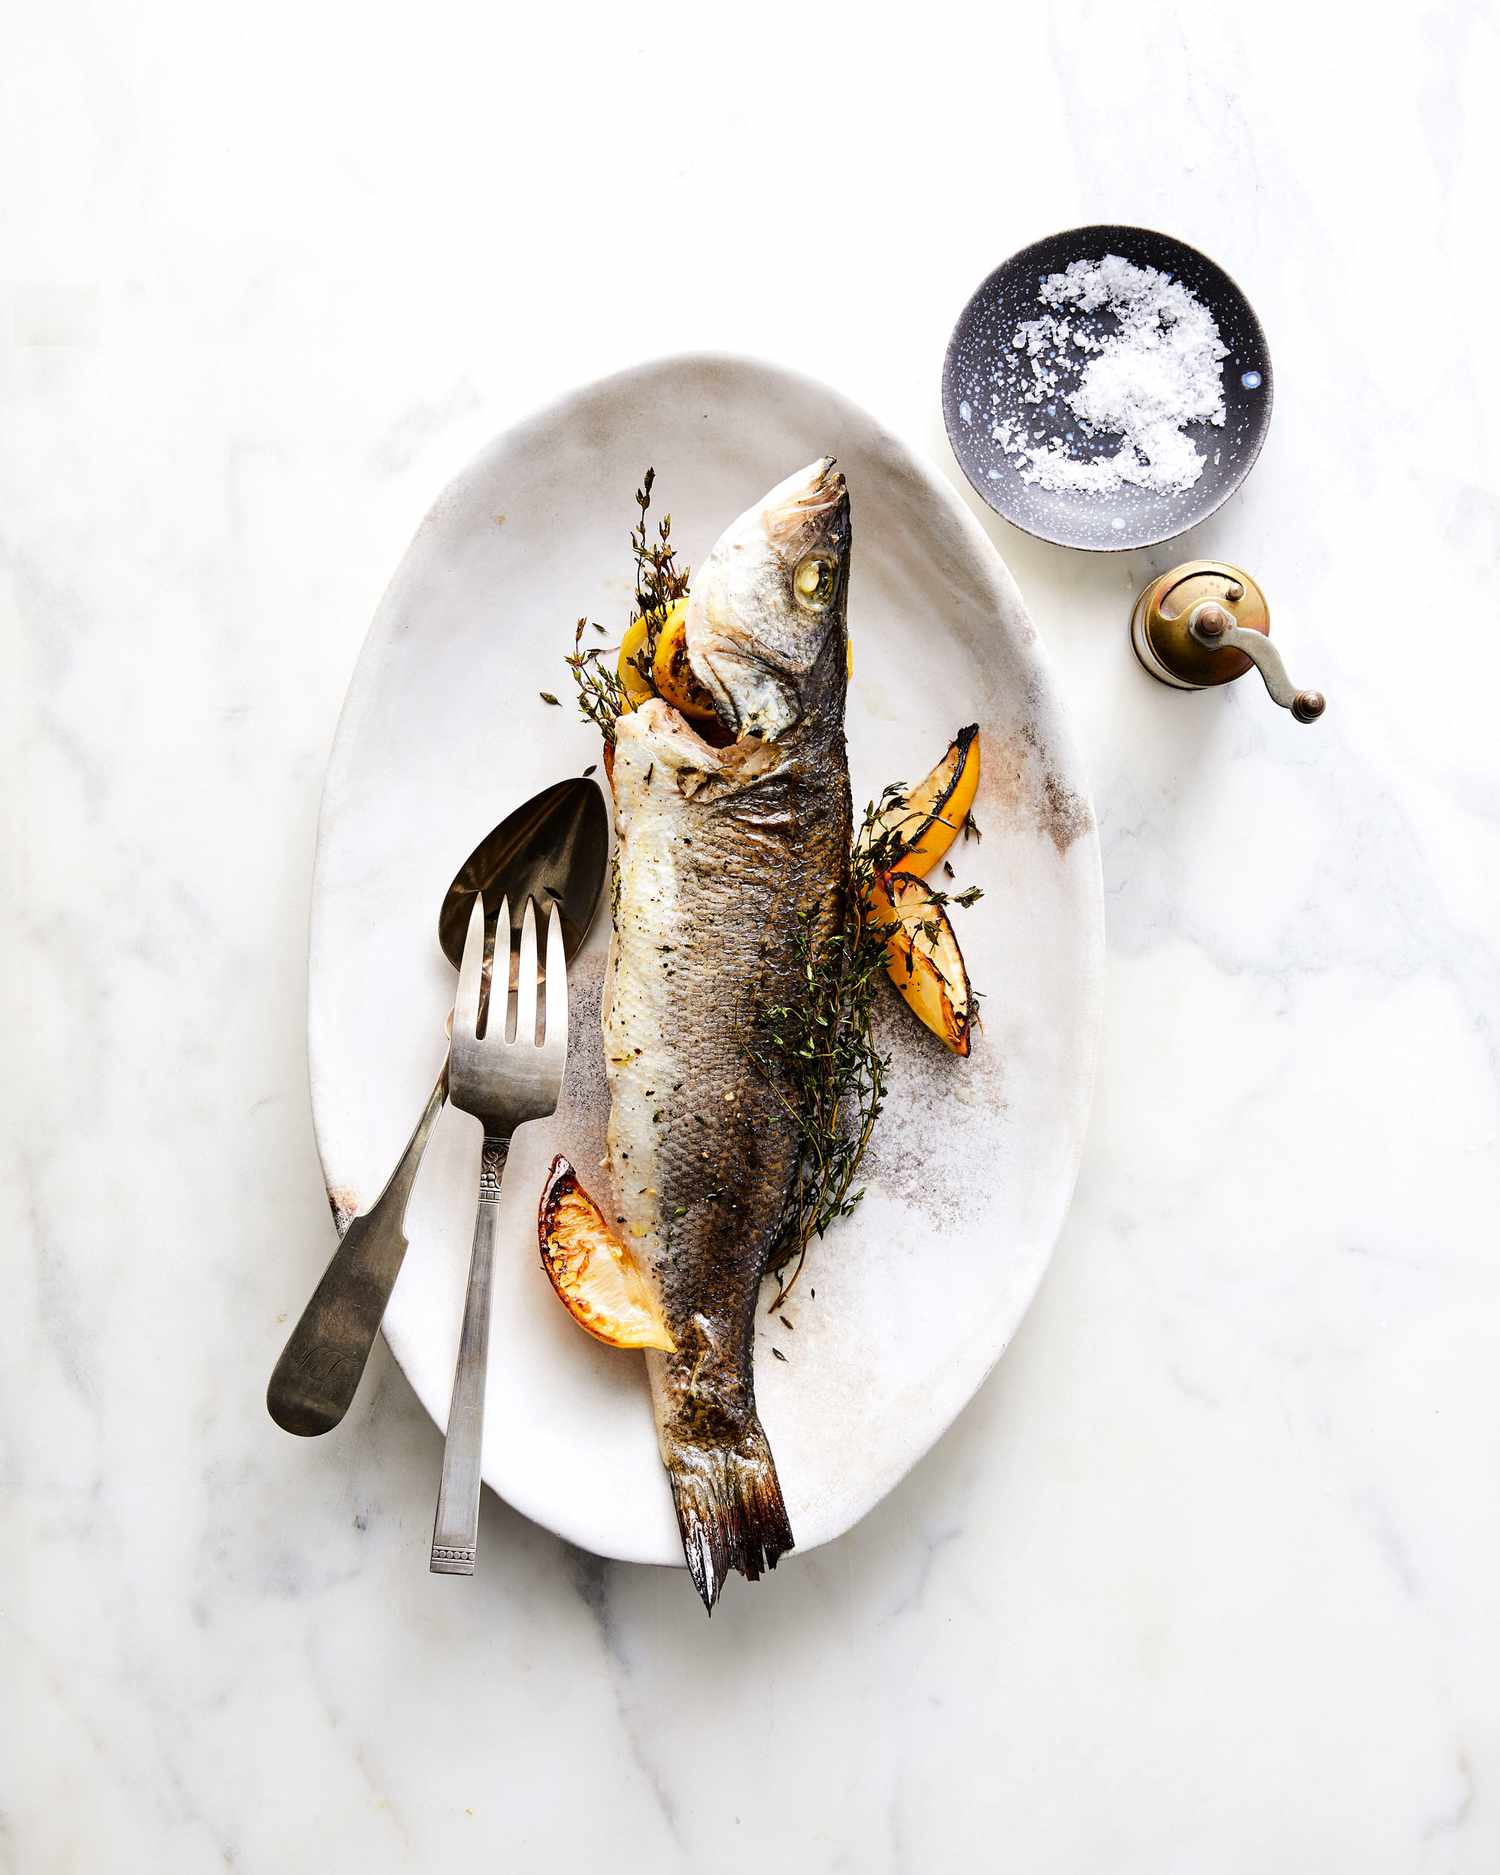 Whole-Roasted Branzino with Lemon and Thyme on plate with lemon wedges and silverware